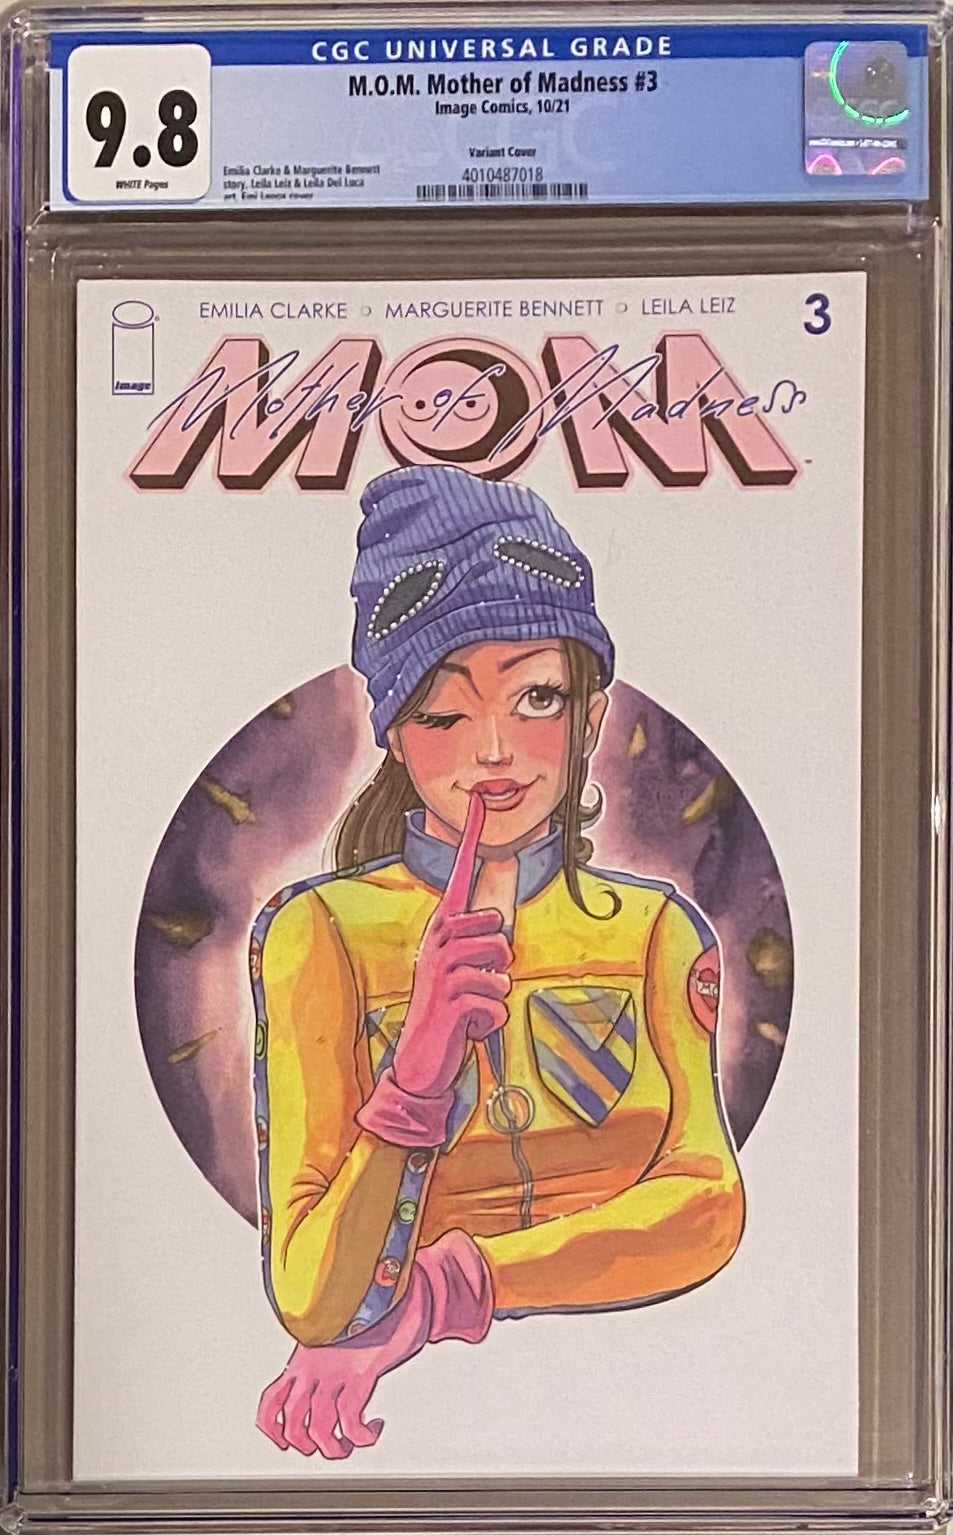 MOM Mother of Madness #3 Lenox Variant CGC 9.8